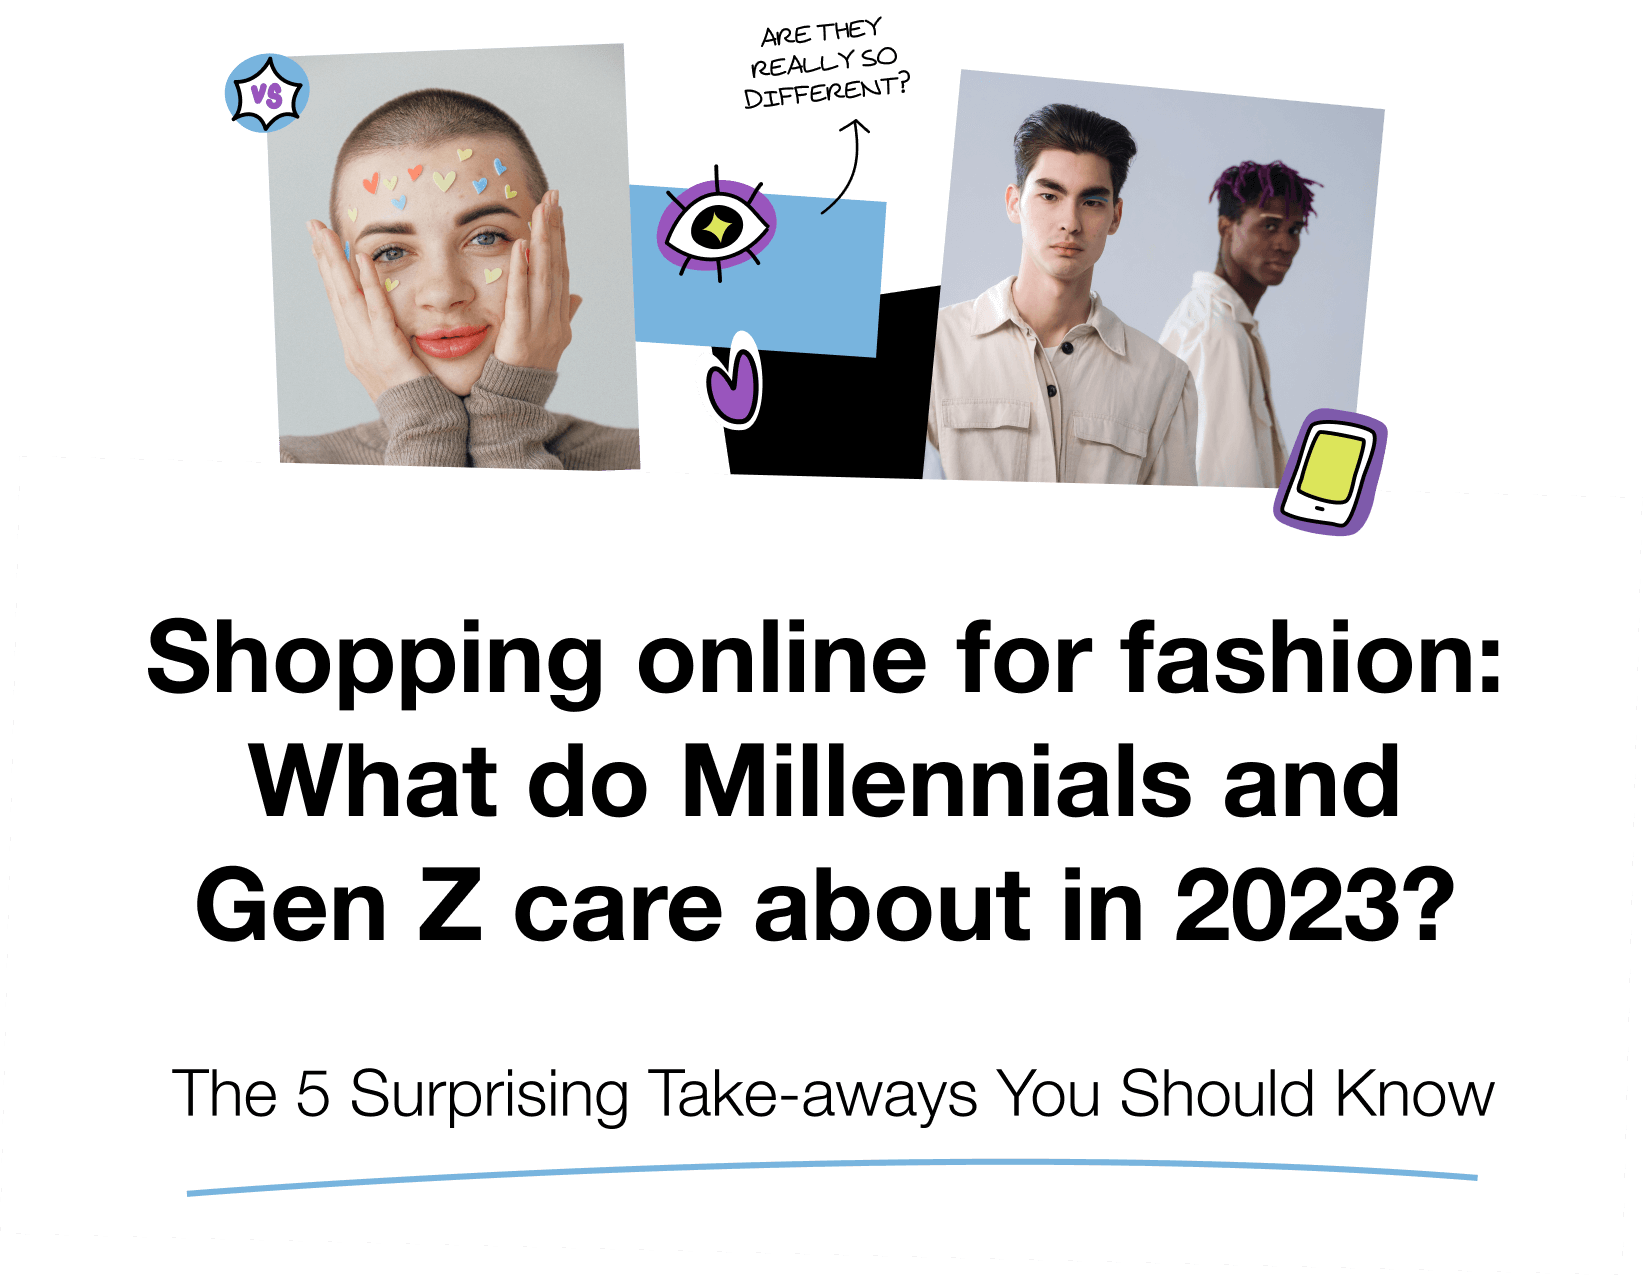 5 Fashion Trends Expected to Take Off With Gen Z & Millennials